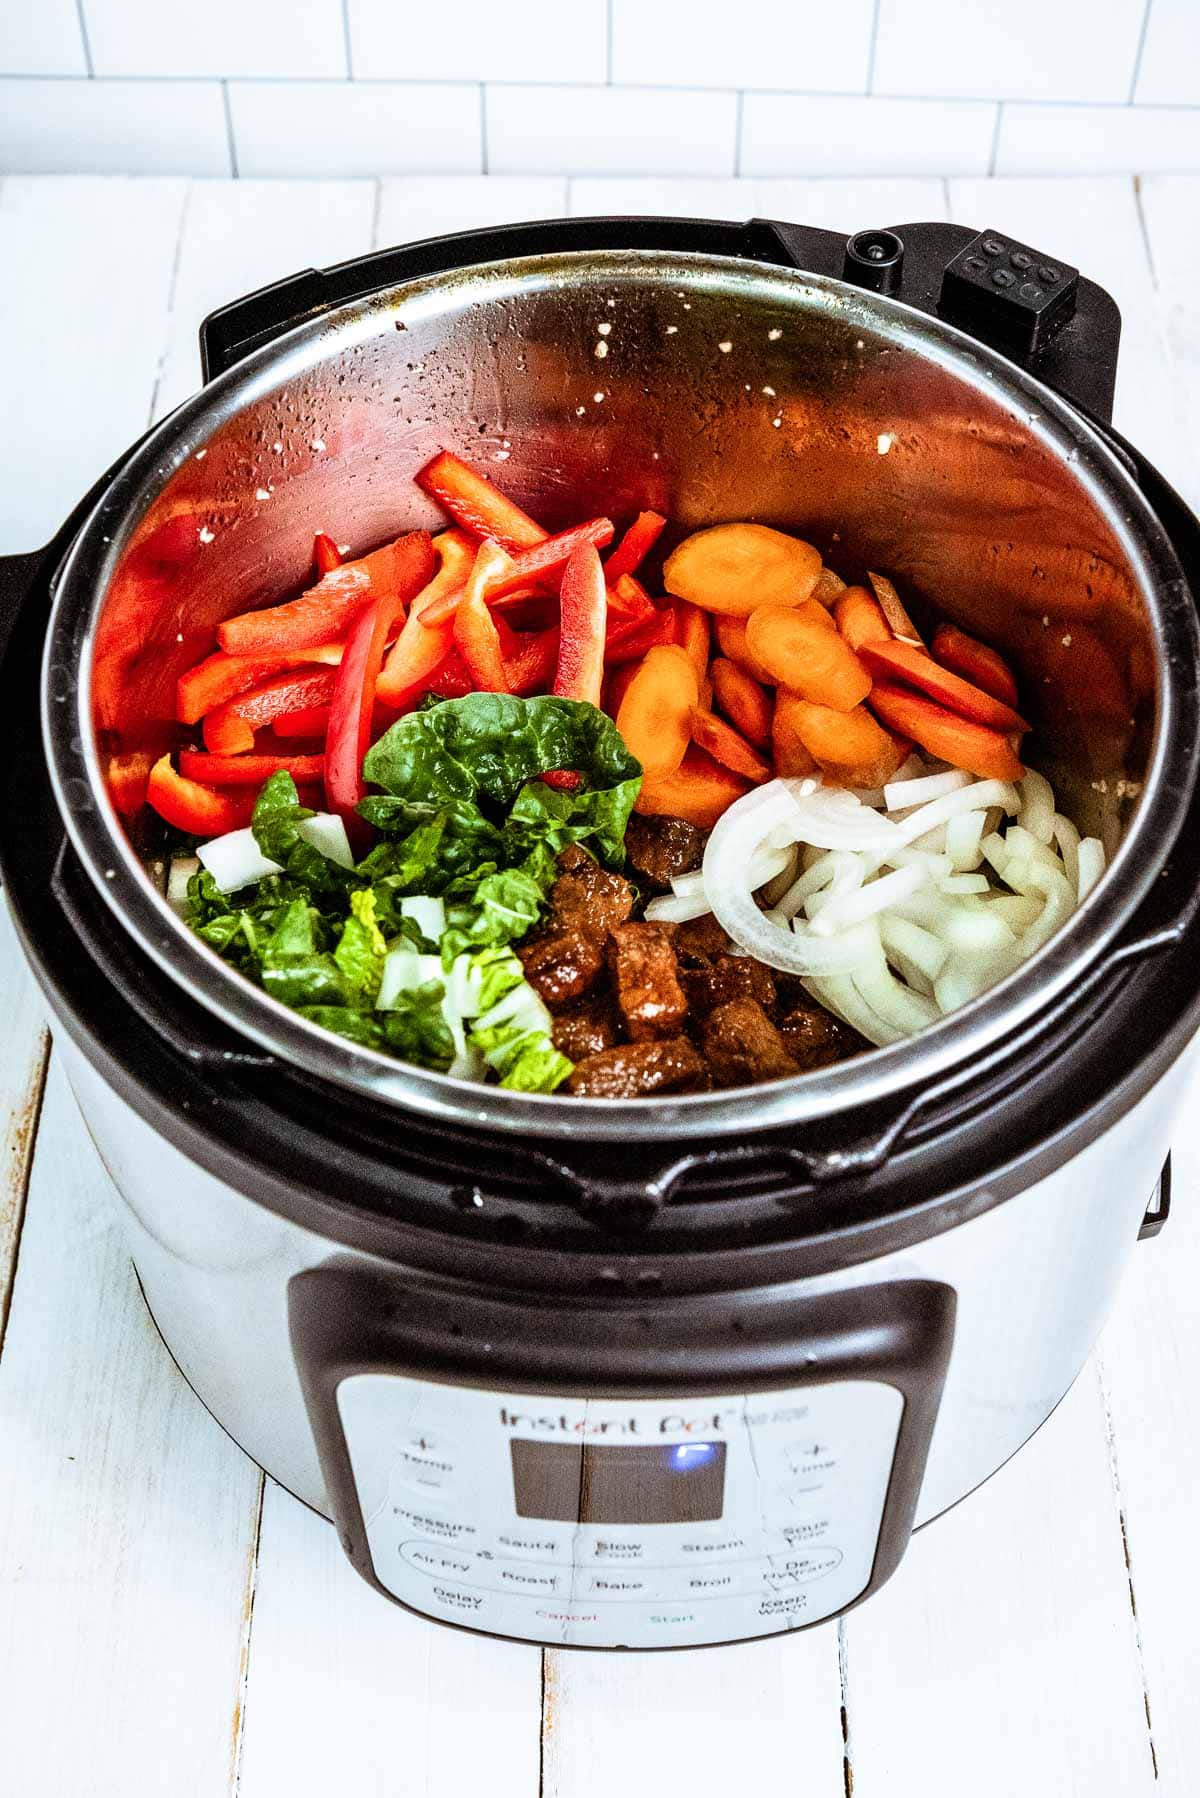 Vegetables and chunks of pork inside an Instant Pot ready to be cooked on top of a white board.